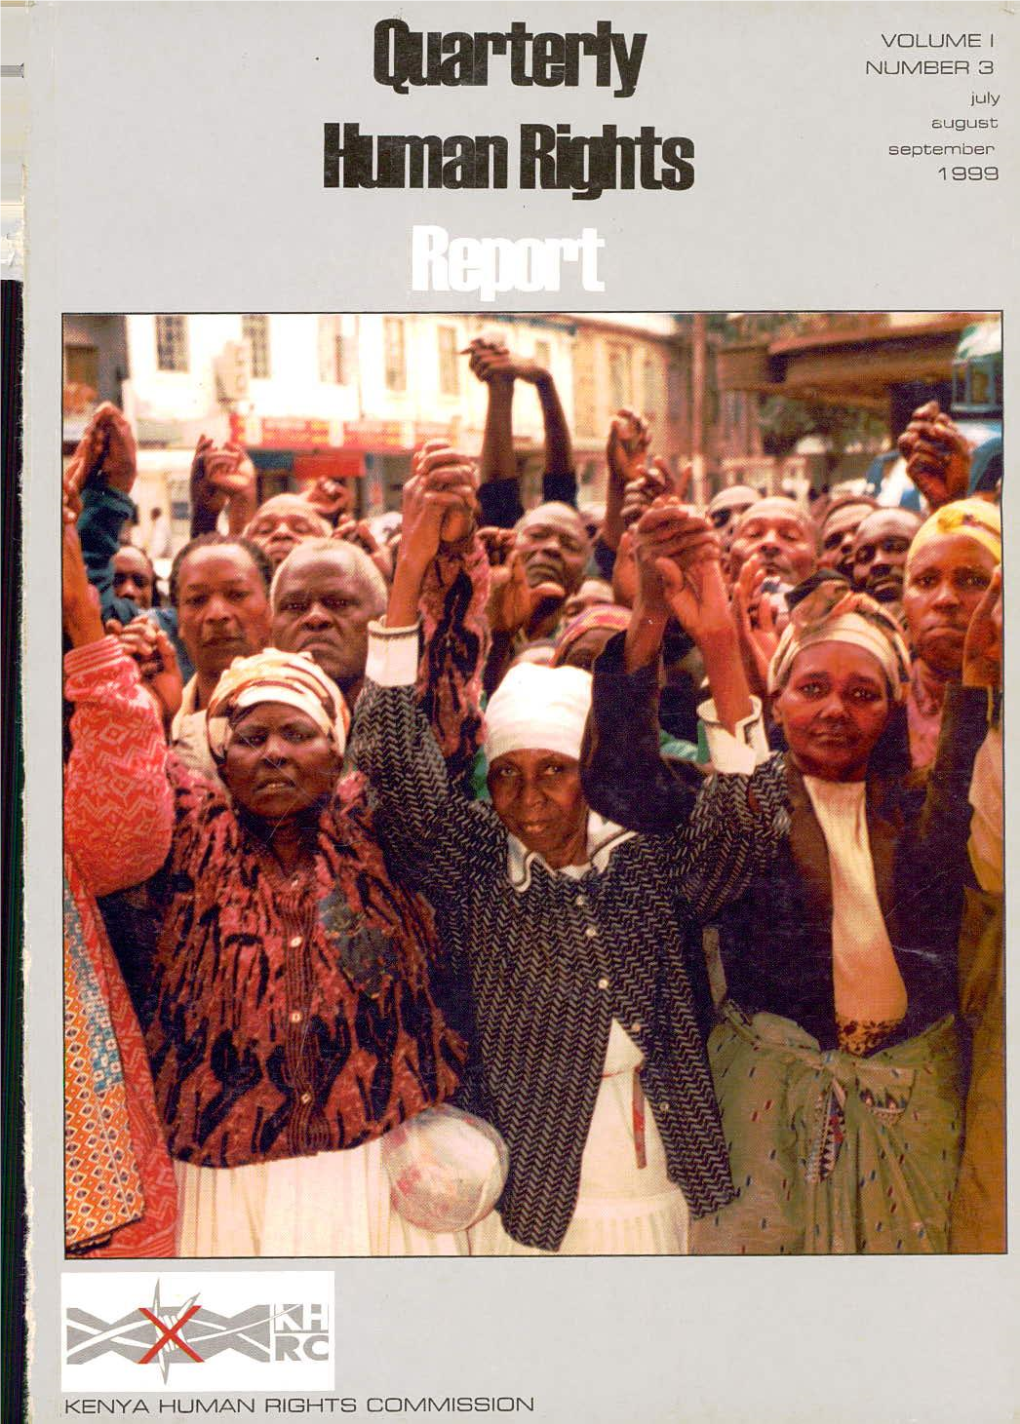 Quartely Human Rights Reports Vol 1 Number 3.Pdf